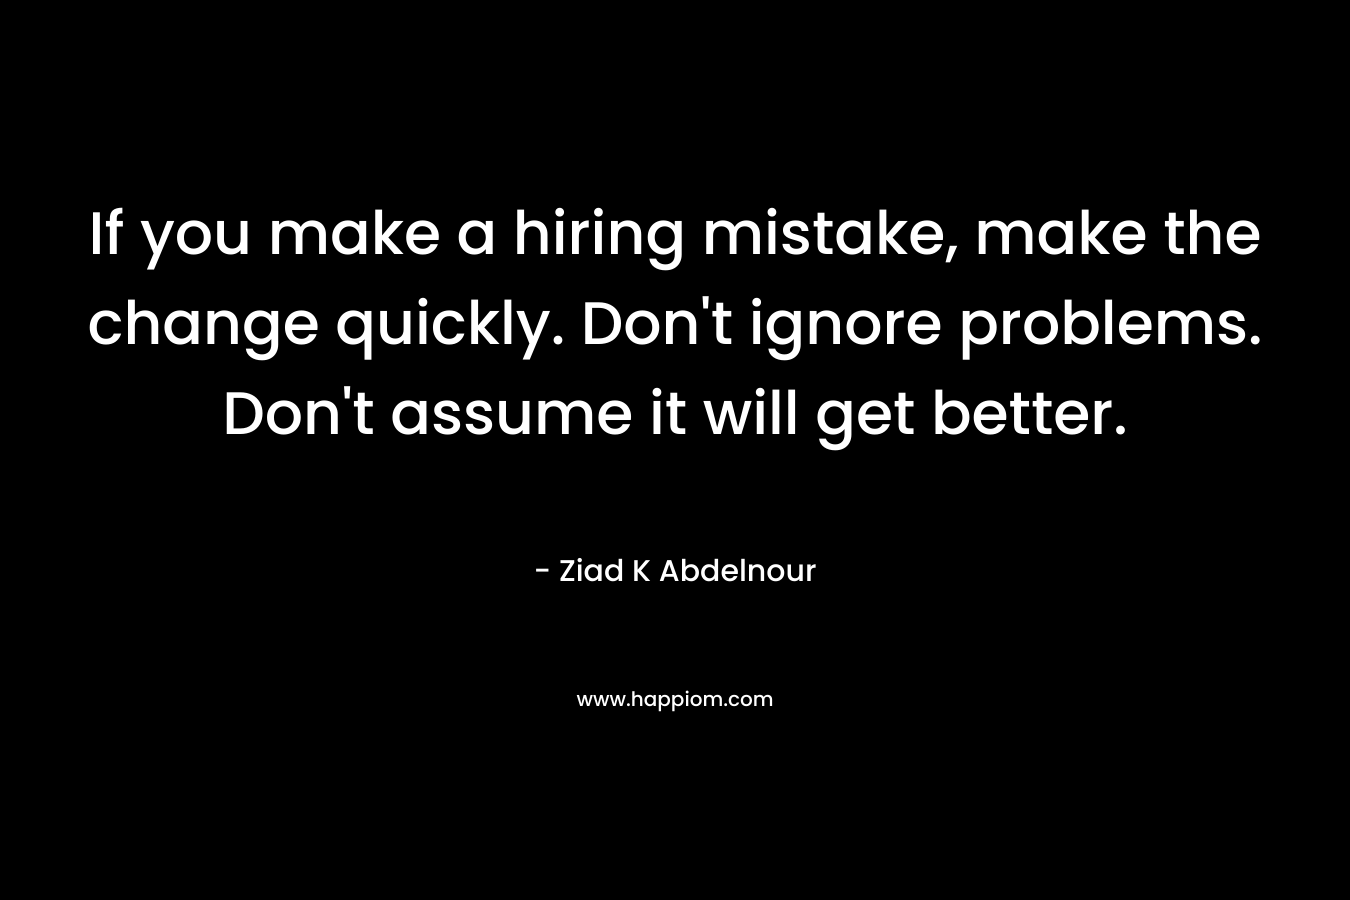 If you make a hiring mistake, make the change quickly. Don’t ignore problems. Don’t assume it will get better. – Ziad K Abdelnour